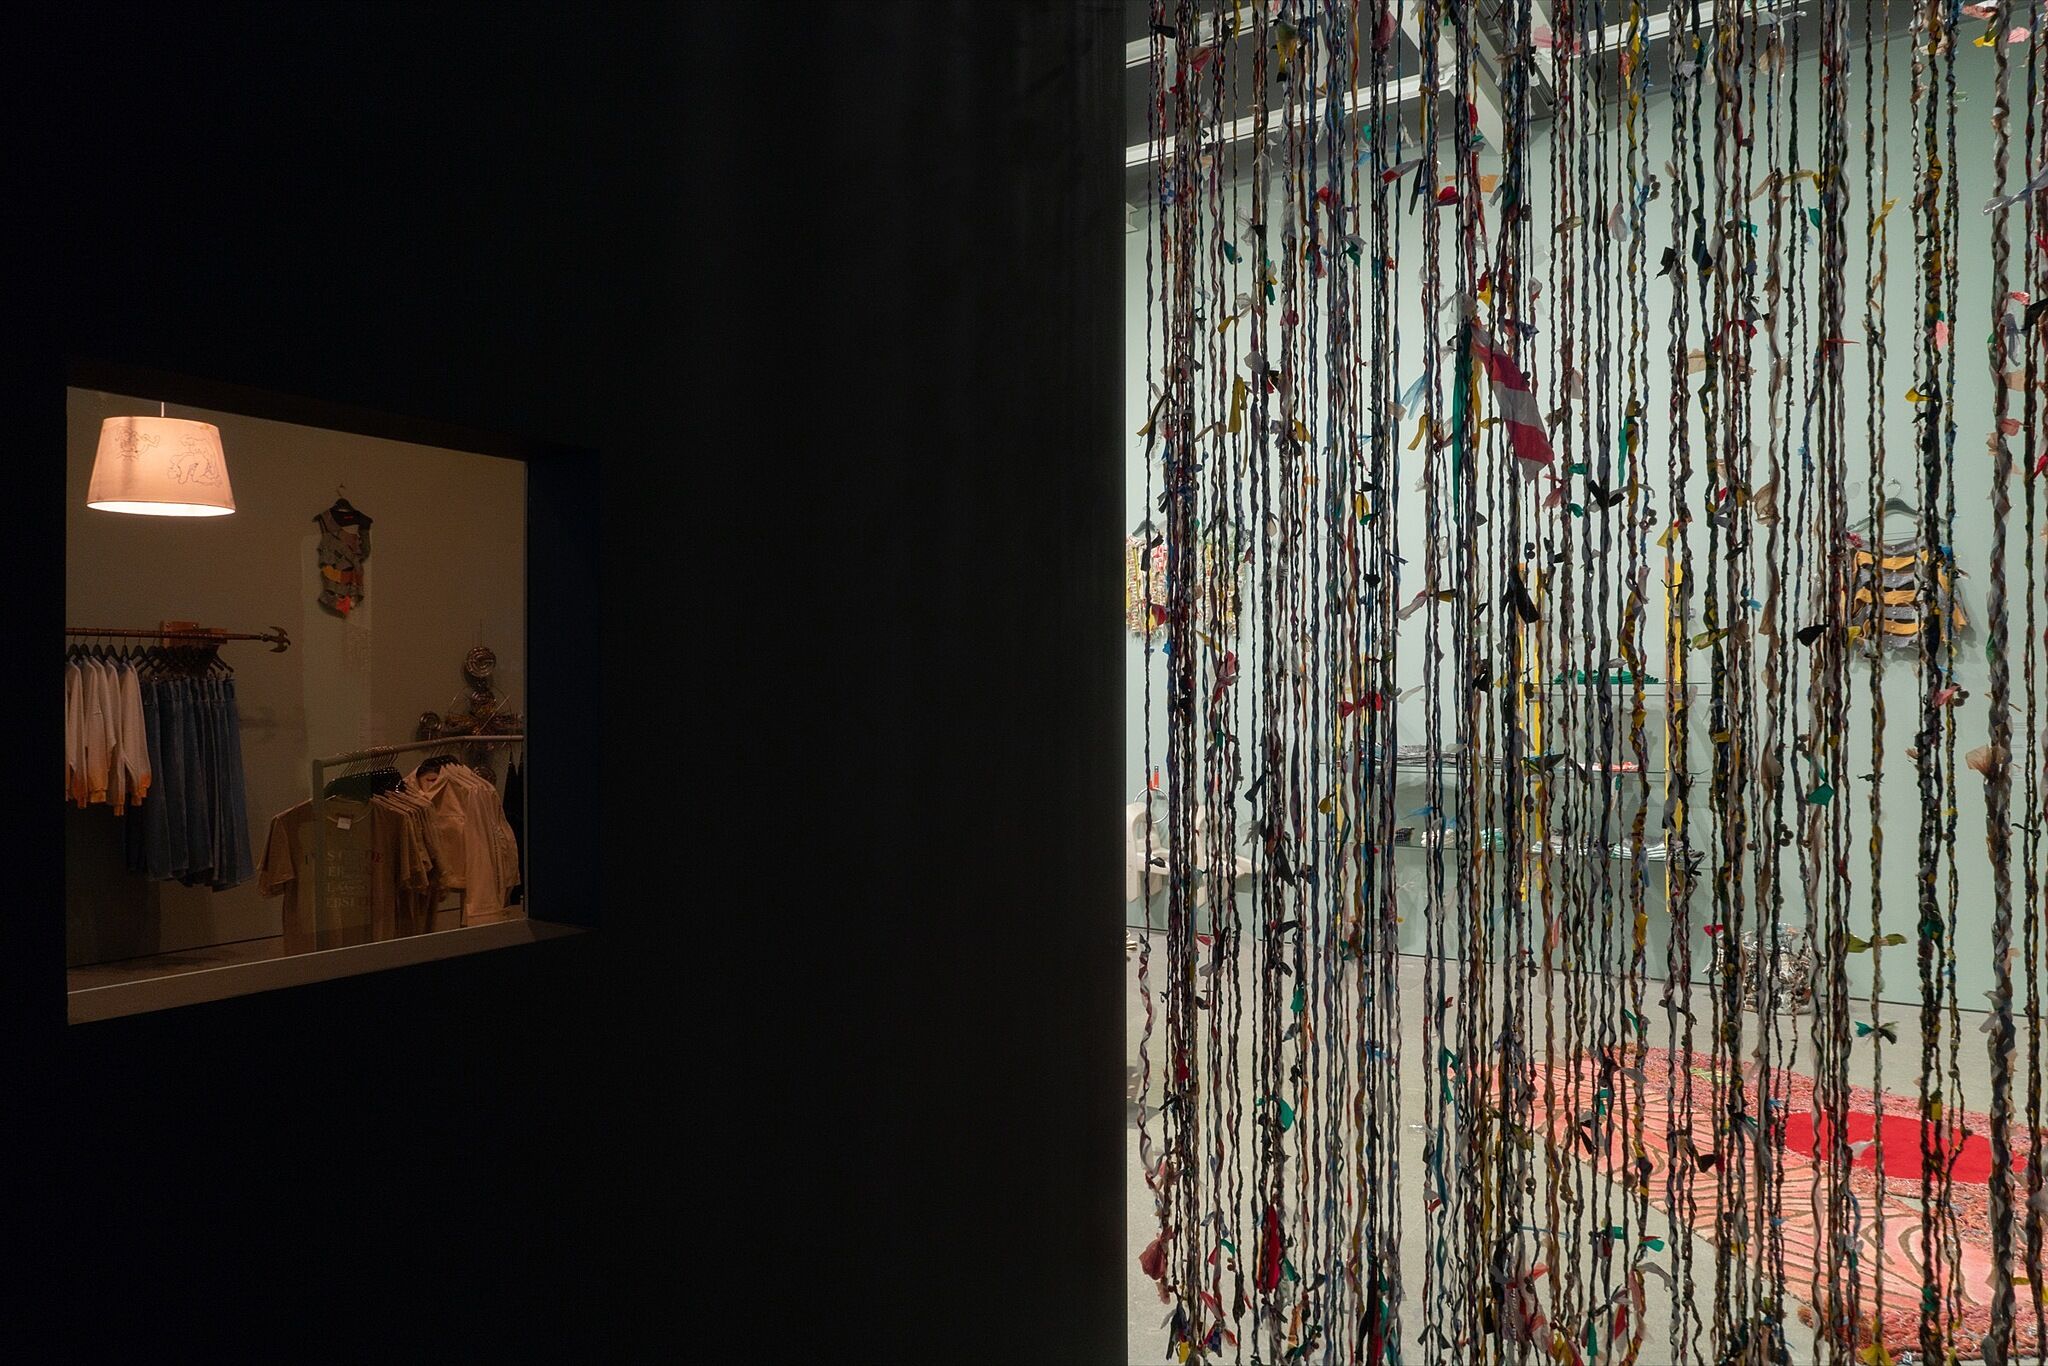 A dimly lit gallery space made to look like a dressing room with a beaded curtain.